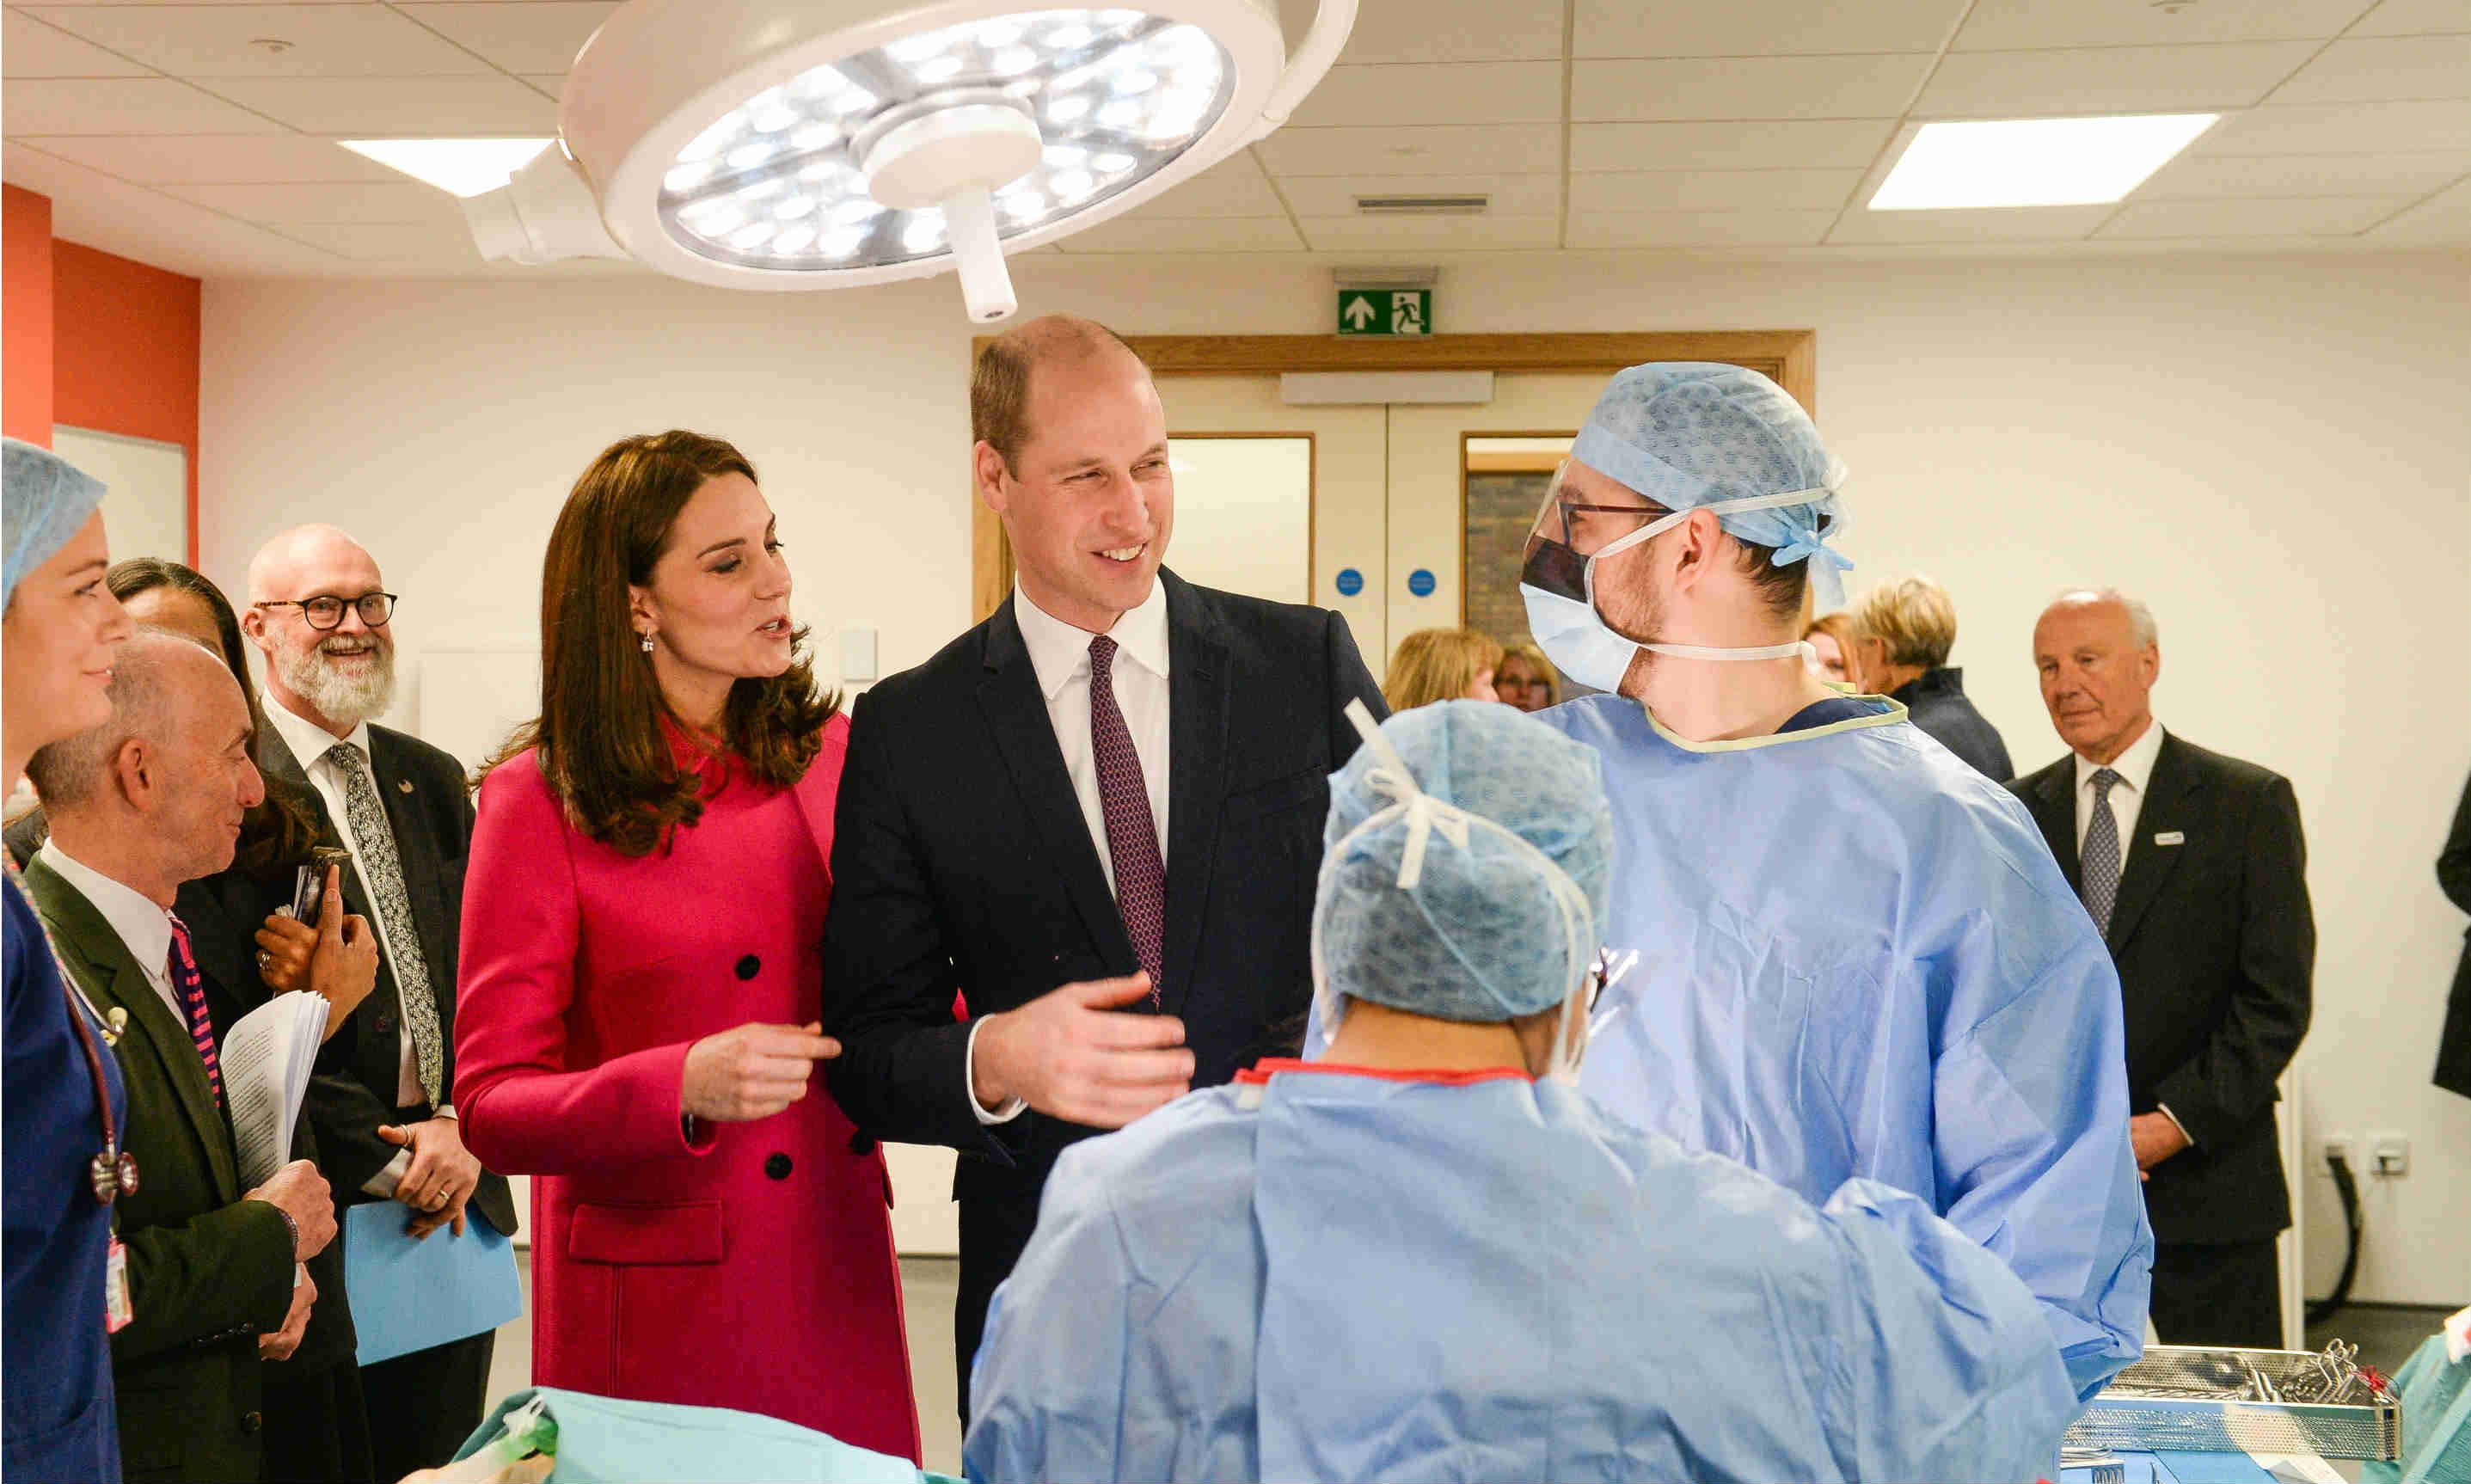 Duke and Duchess of Cambridge Open New Science & Health Building at Coventry University